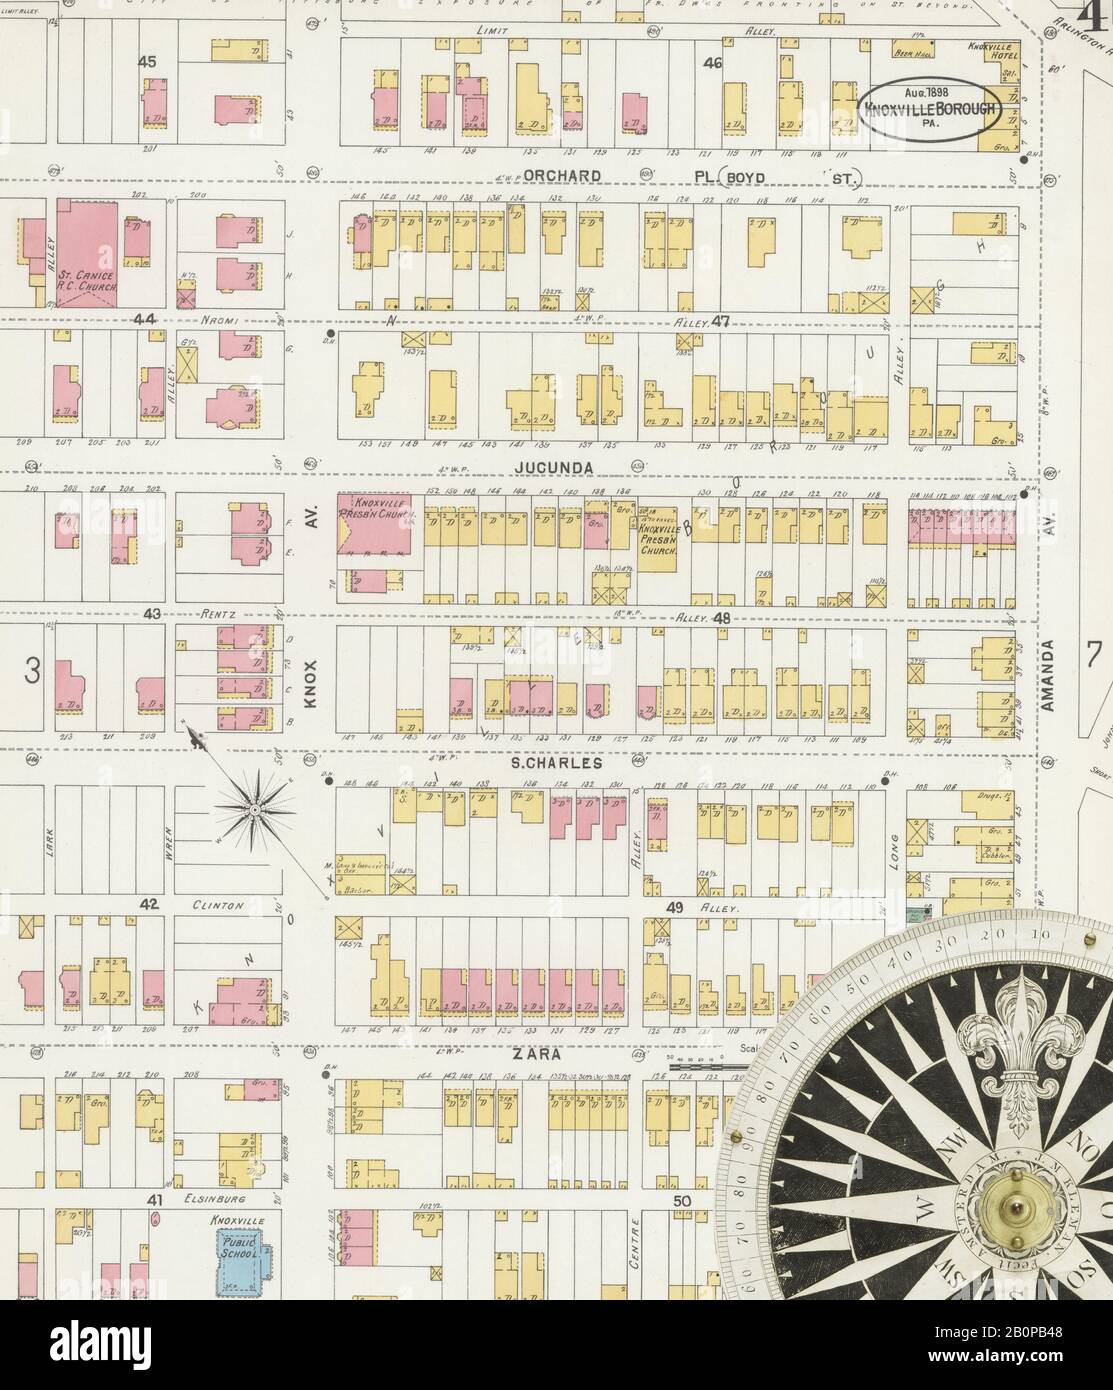 Image 4 of Sanborn Fire Insurance Map from Knoxville Borough, Allegheny County, Pennsylvania. Aug 1898. 8 Sheet(s). Acquired after 1981, America, street map with a Nineteenth Century compass Stock Photo